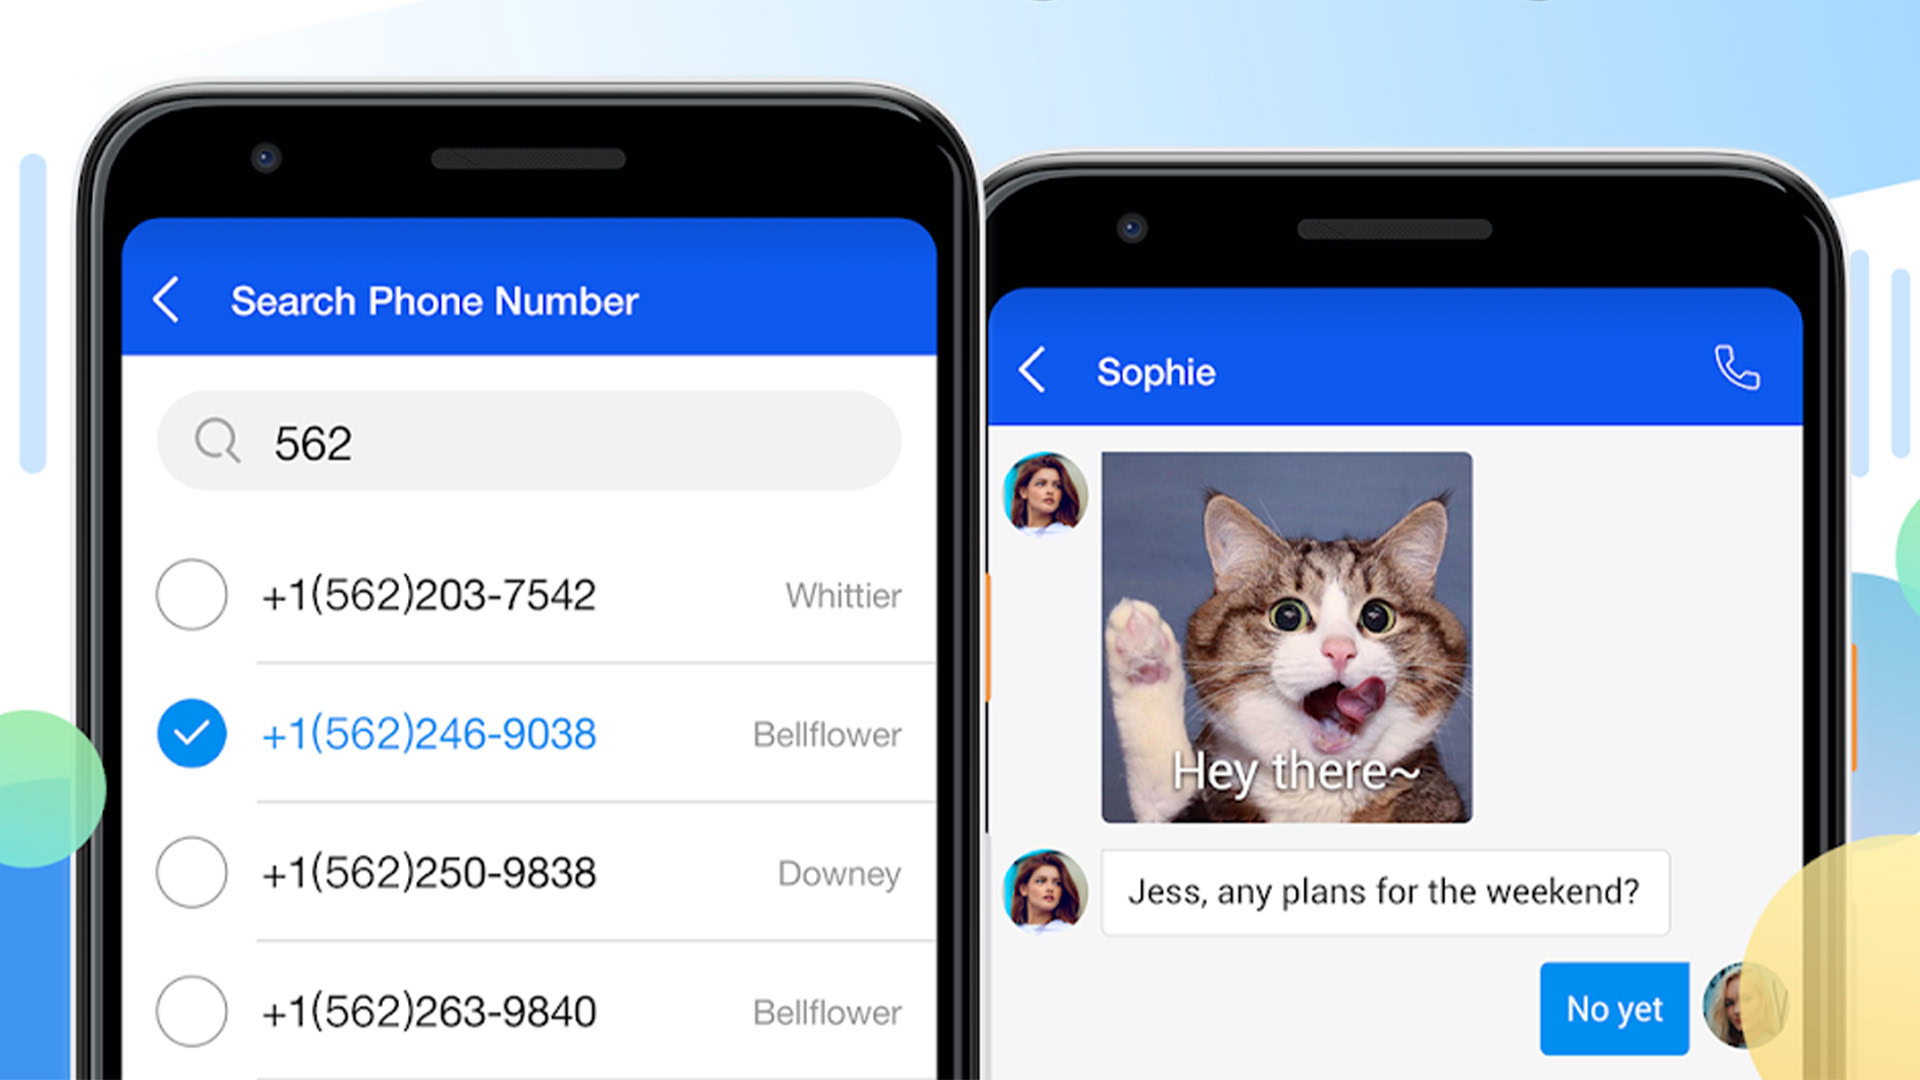 How Easy It Is to Spoof Phone Numbers